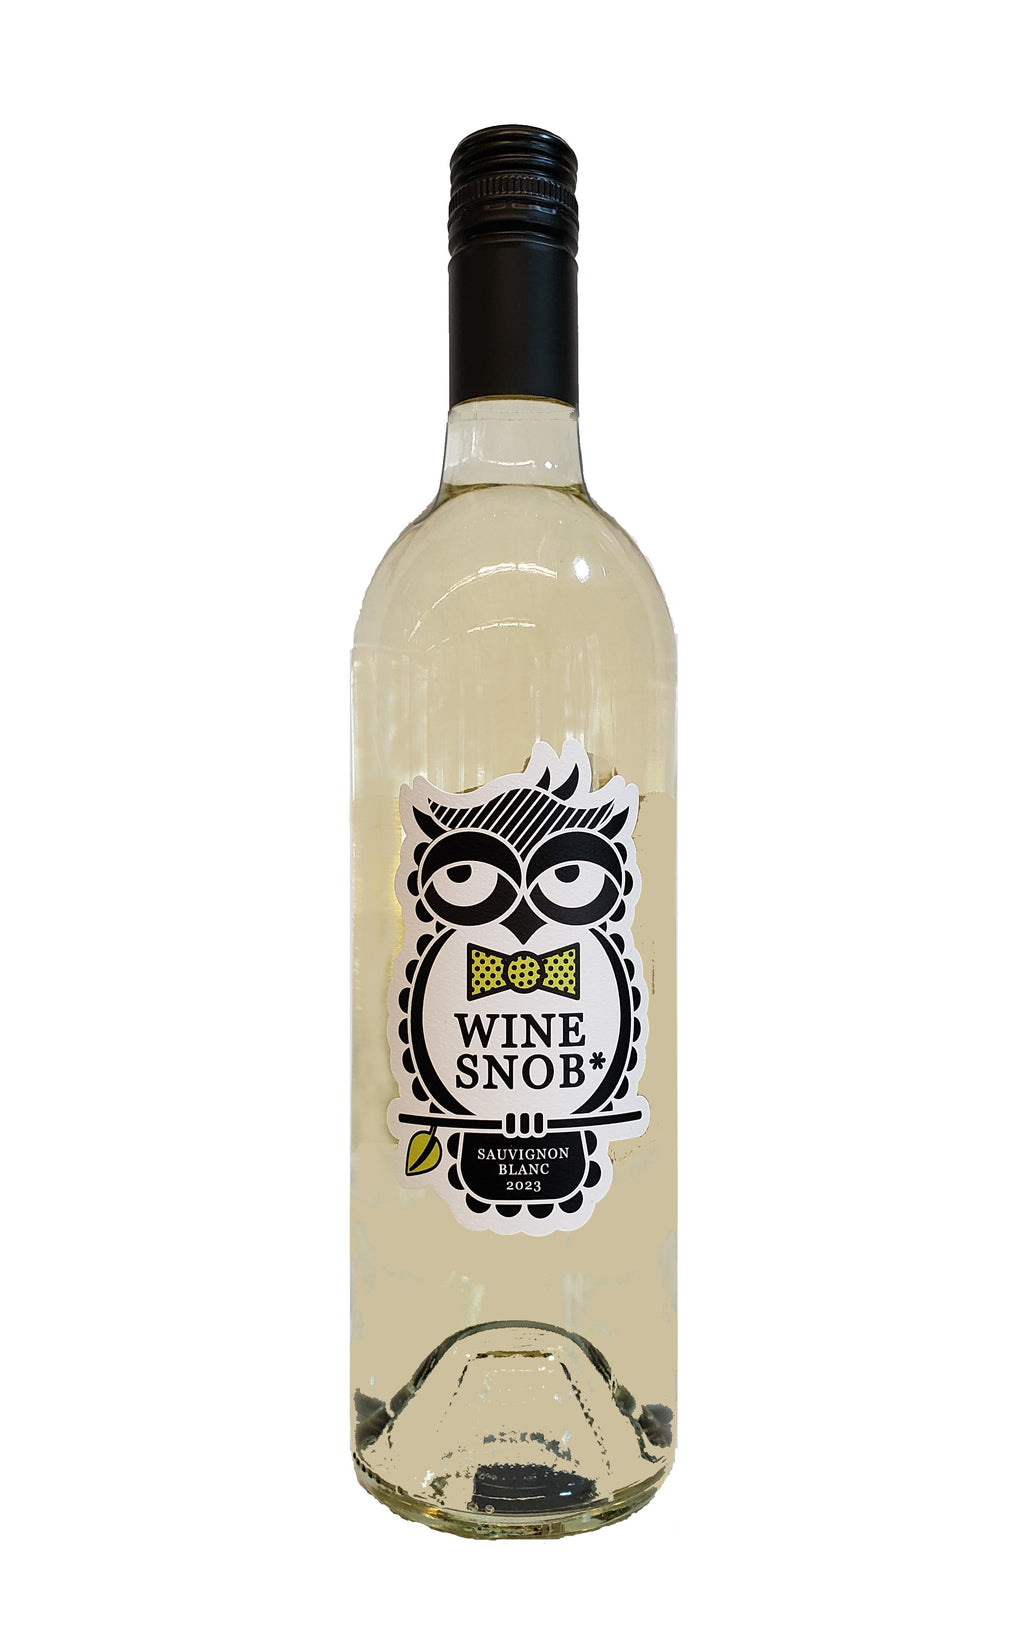 Bordeaux-style bottle with the Wine Snob* 2023 Sauvignon Blanc label showing an owl perched on a stick with a leaf, slightly rolling its eyes, and wearing a lime green bowtie with white polka dots.